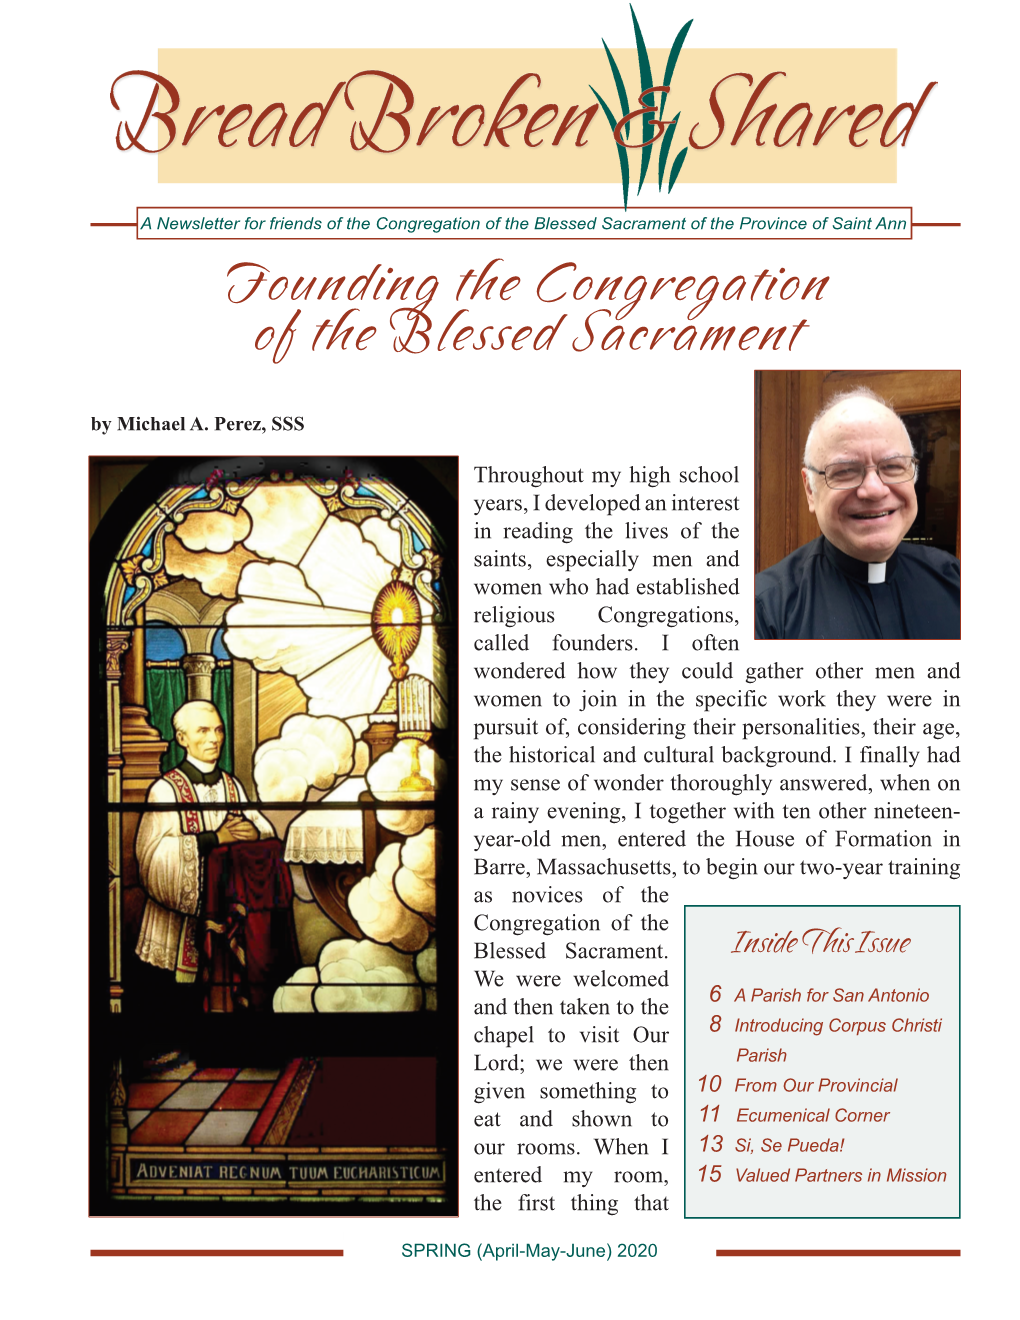 Founding the Congregation of the Blessed Sacrament by Michael A